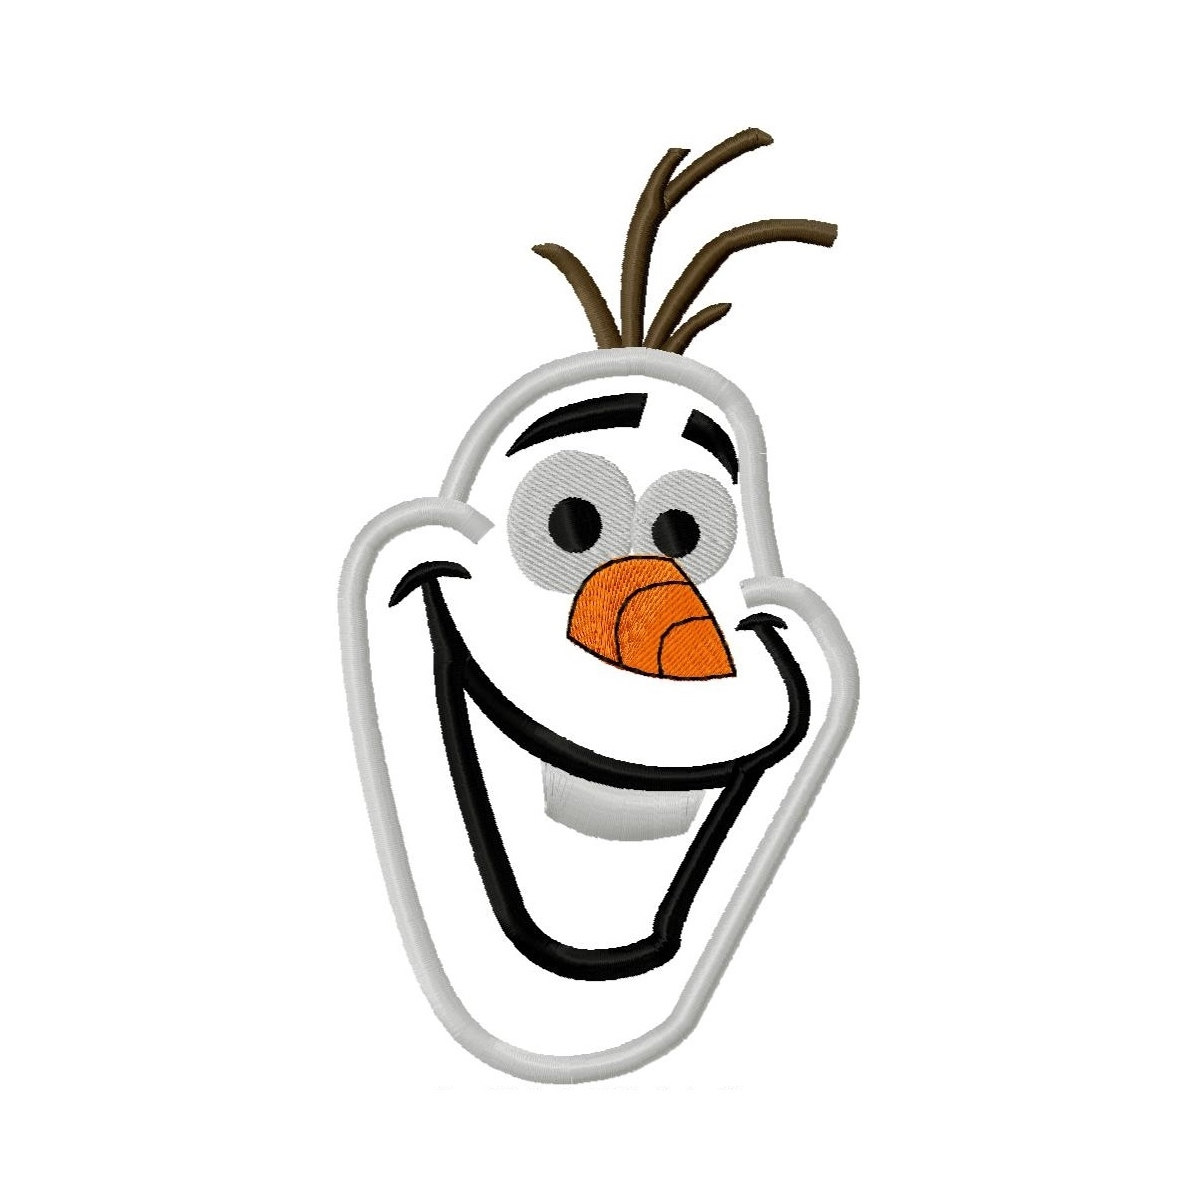 Olaf clipart head, Olaf head Transparent FREE for download on